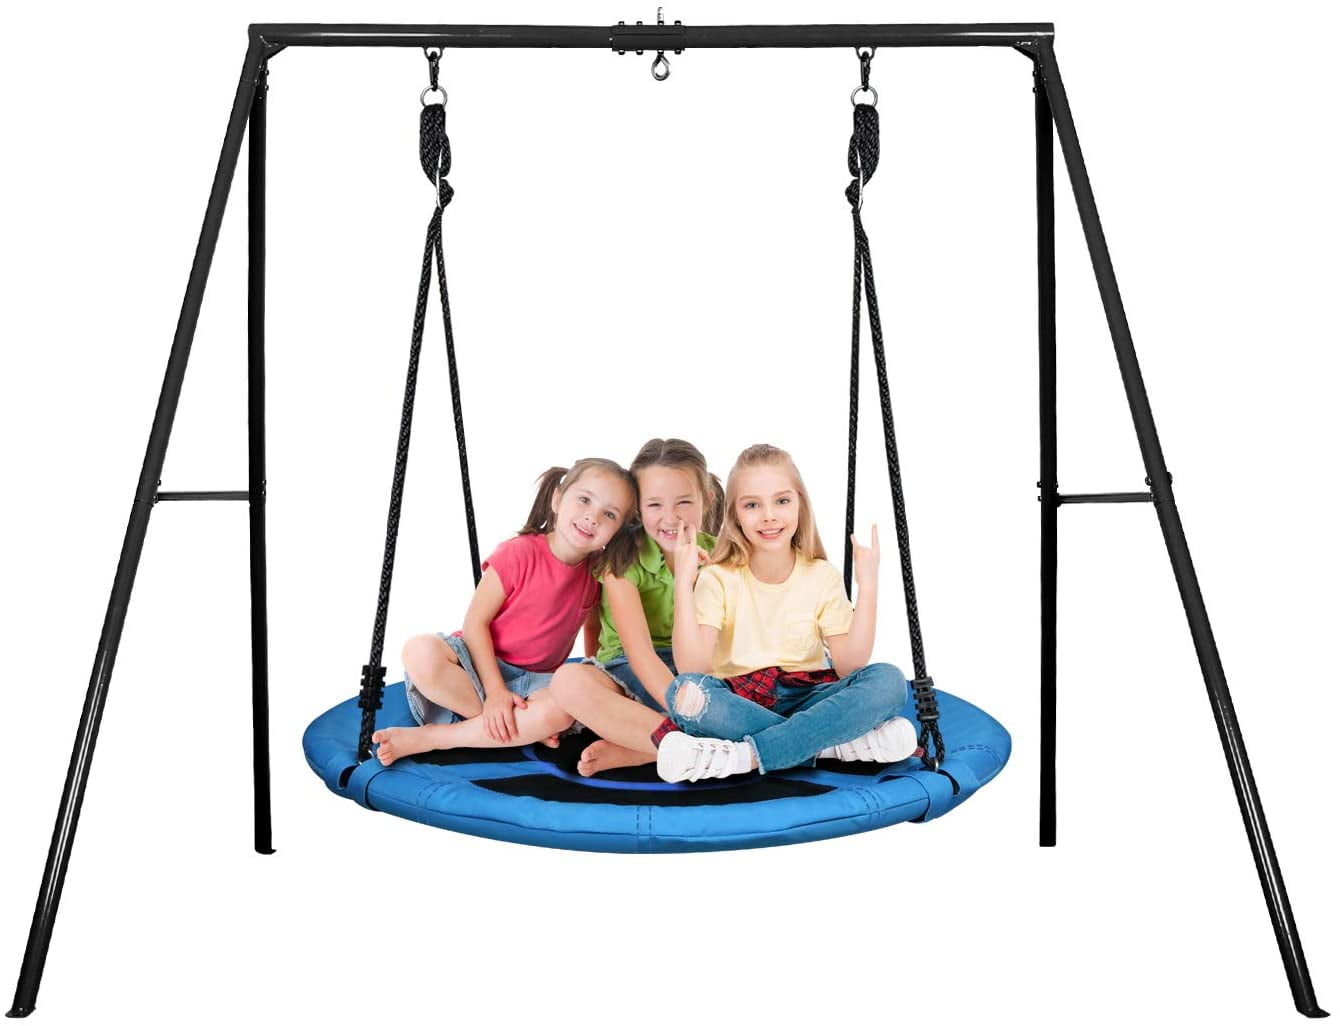 Trekassy 440lbs Swing Set With 40 Inch, Round Metal Porch Swing Frame